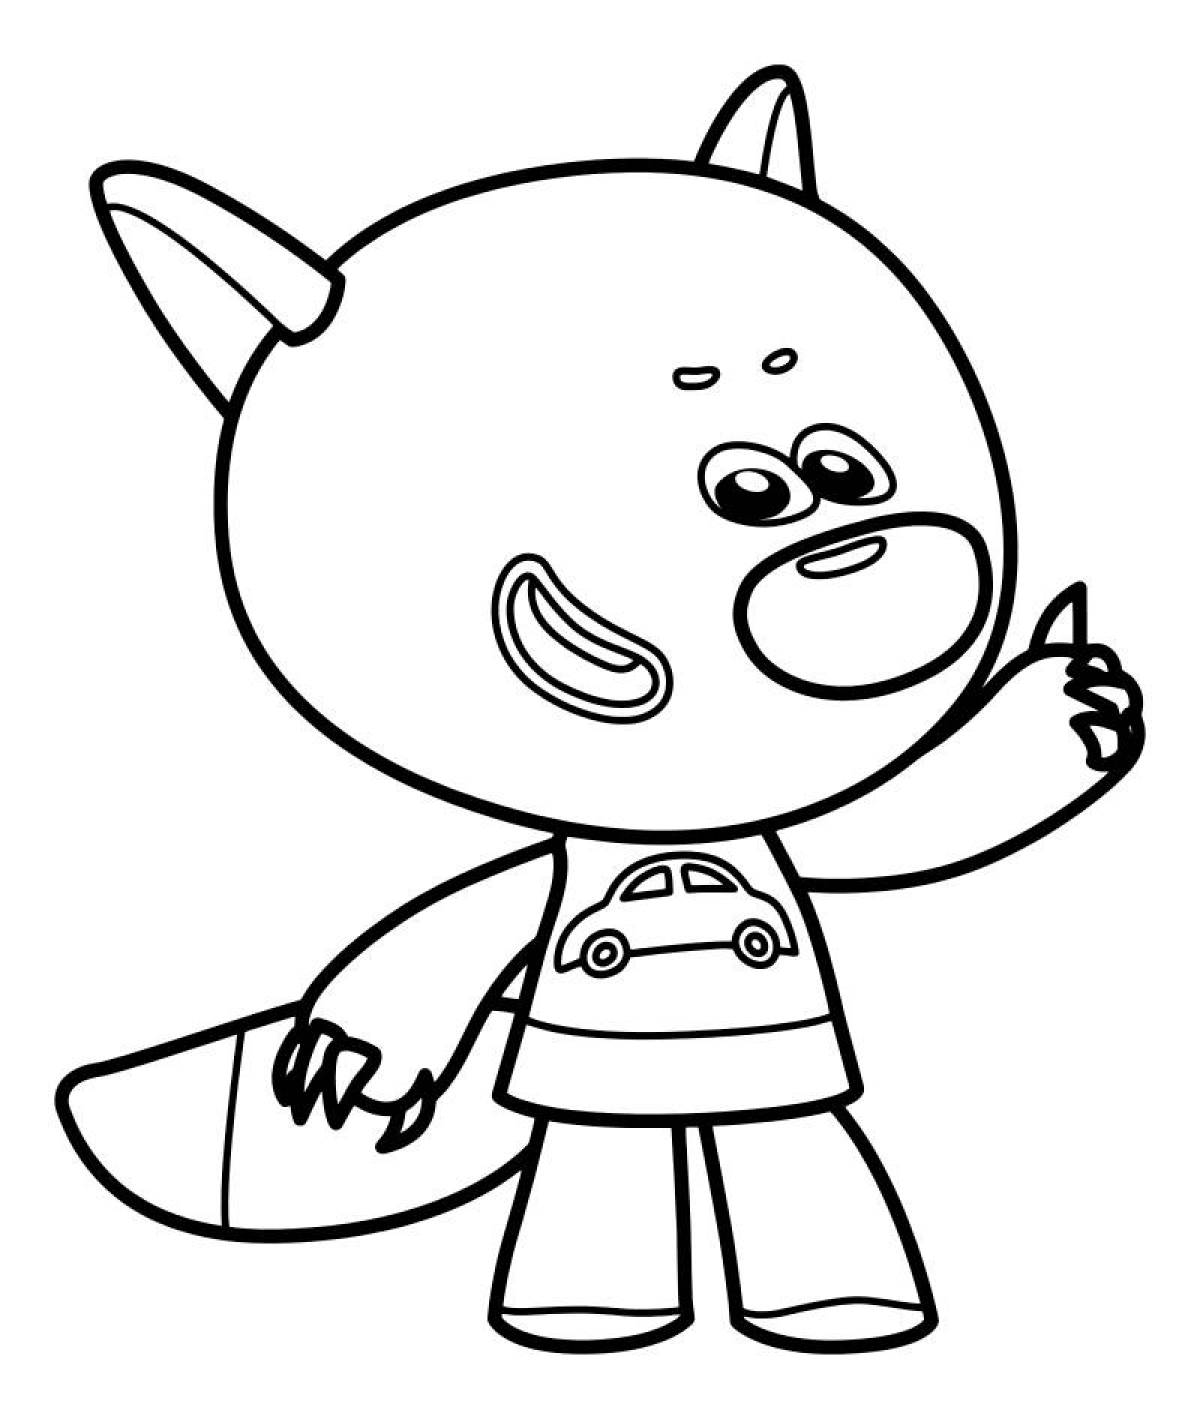 Wiggly bears coloring pages